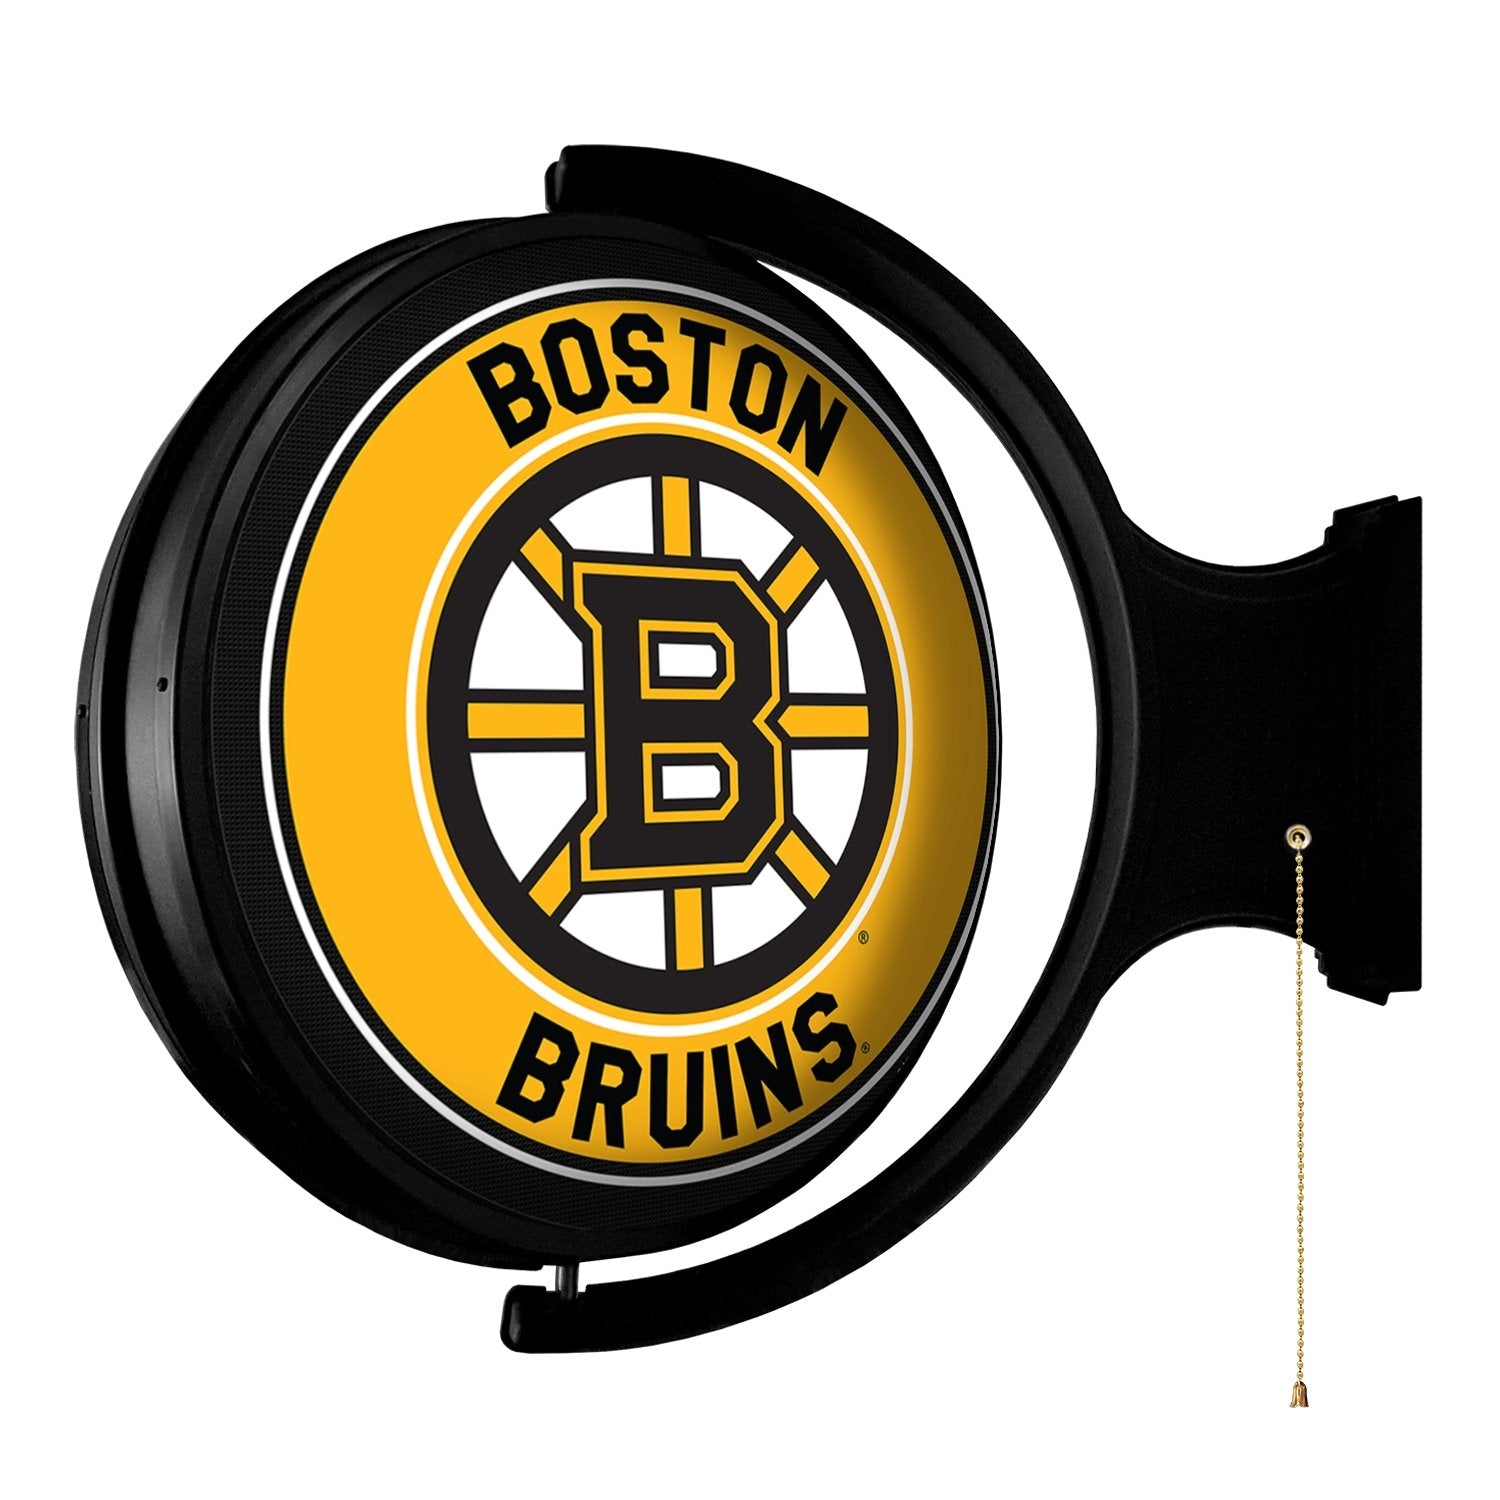 Boston Bruins: Original Round Rotating Lighted Wall Sign - The Fan-Brand